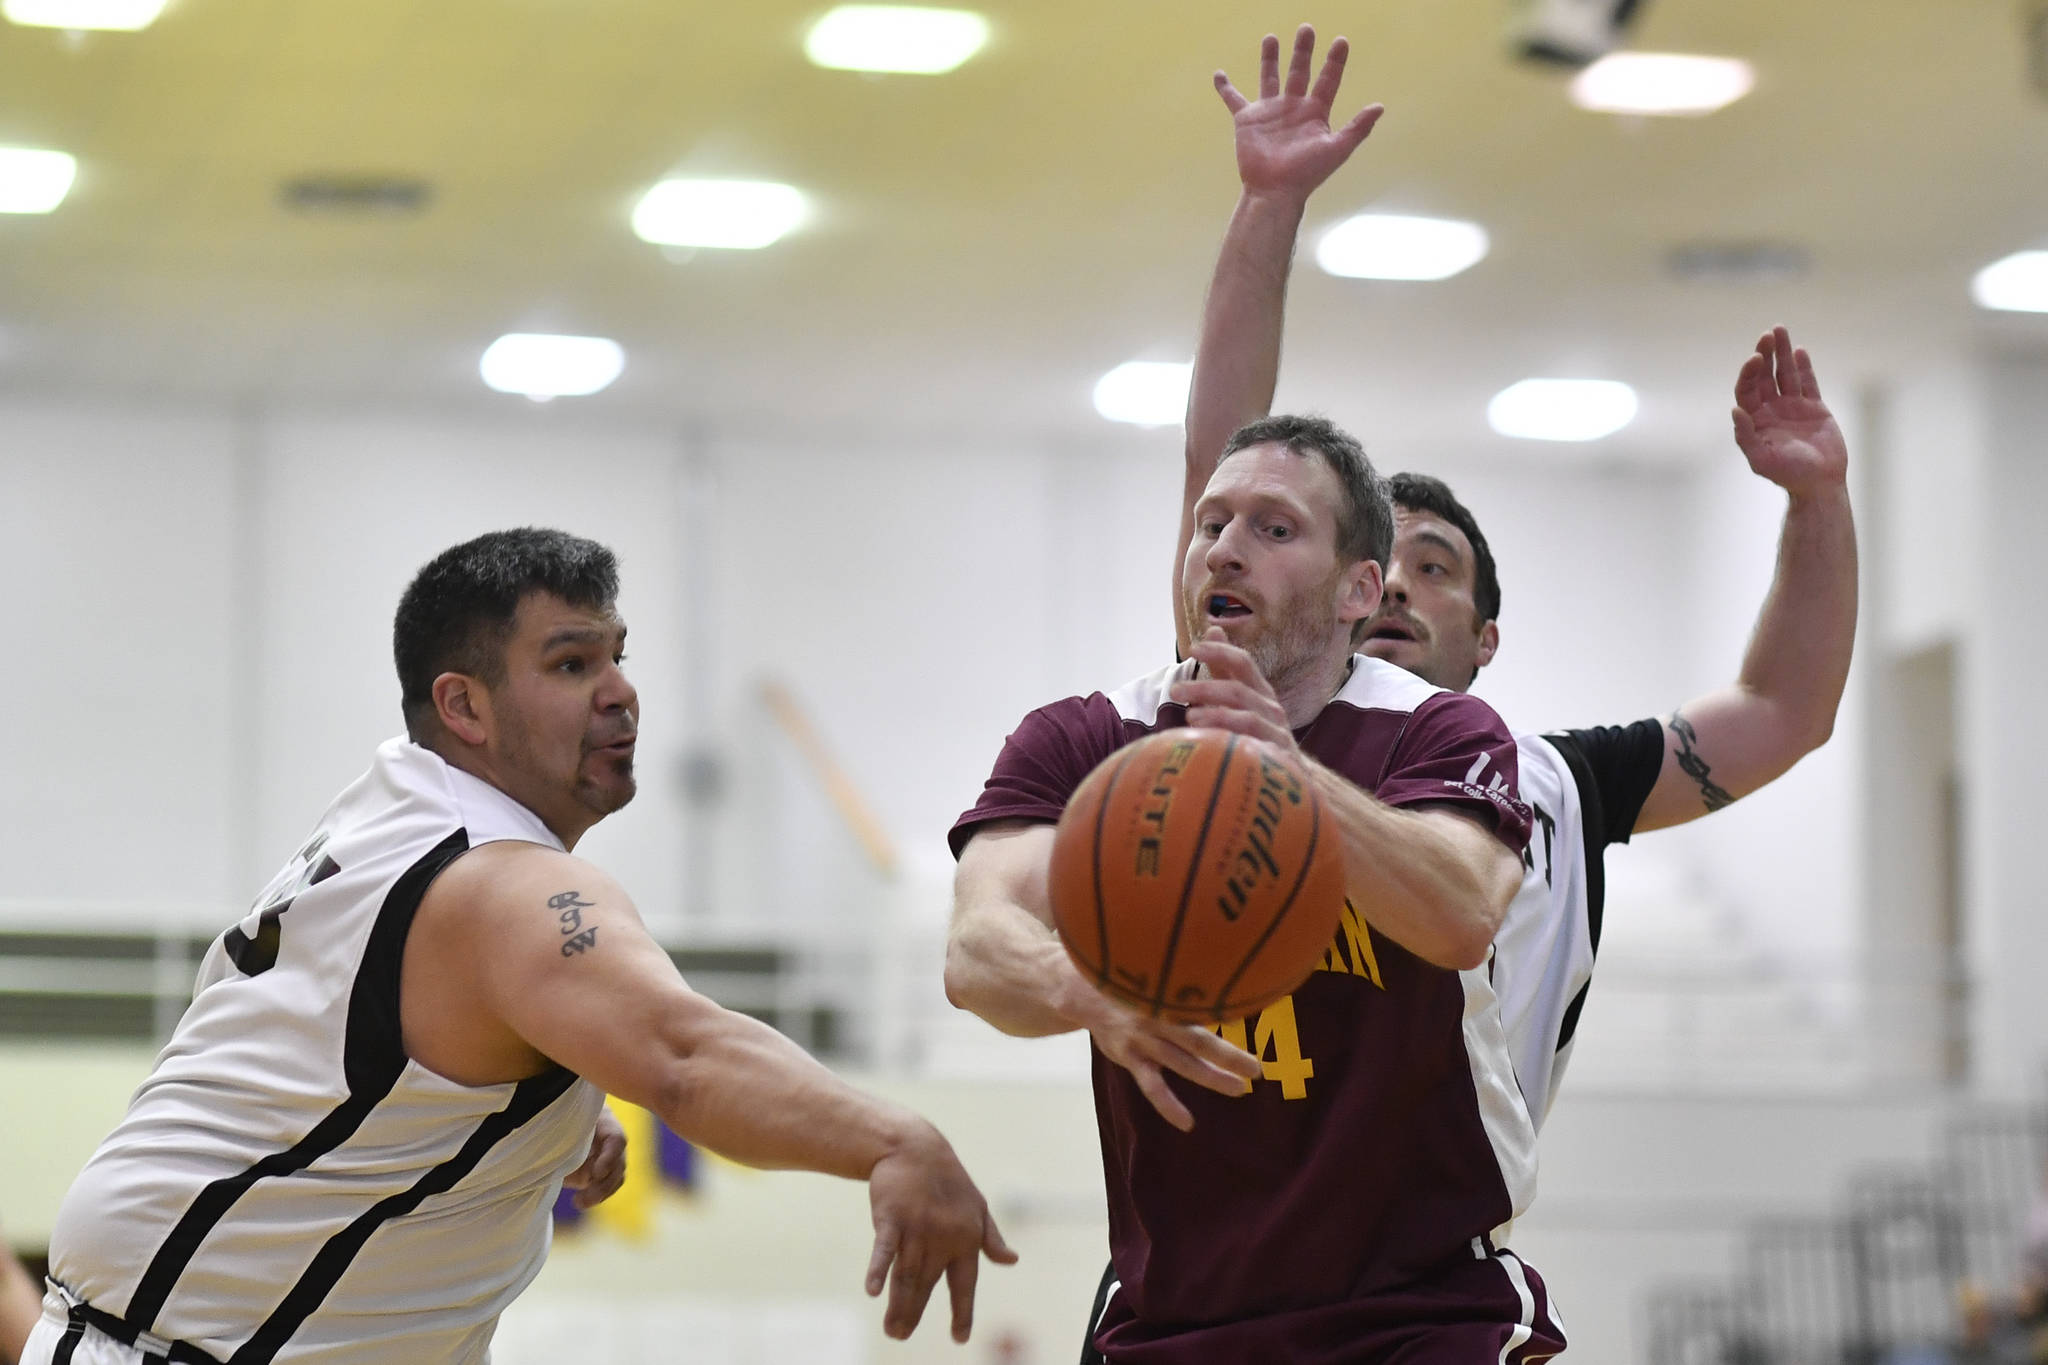 Klukwan’s Andrew Friske, center, has the ball batted away by Yakutat’s Ralph Wolfe, left, at the Juneau Lions Club 73rd Annual Gold Medal Basketball Tournament at Juneau-Douglas High School: Yadaa.at Kalé on Tuesday, March 19, 2019. Klukwan won 94-61. (Michael Penn | Juneau Empire)